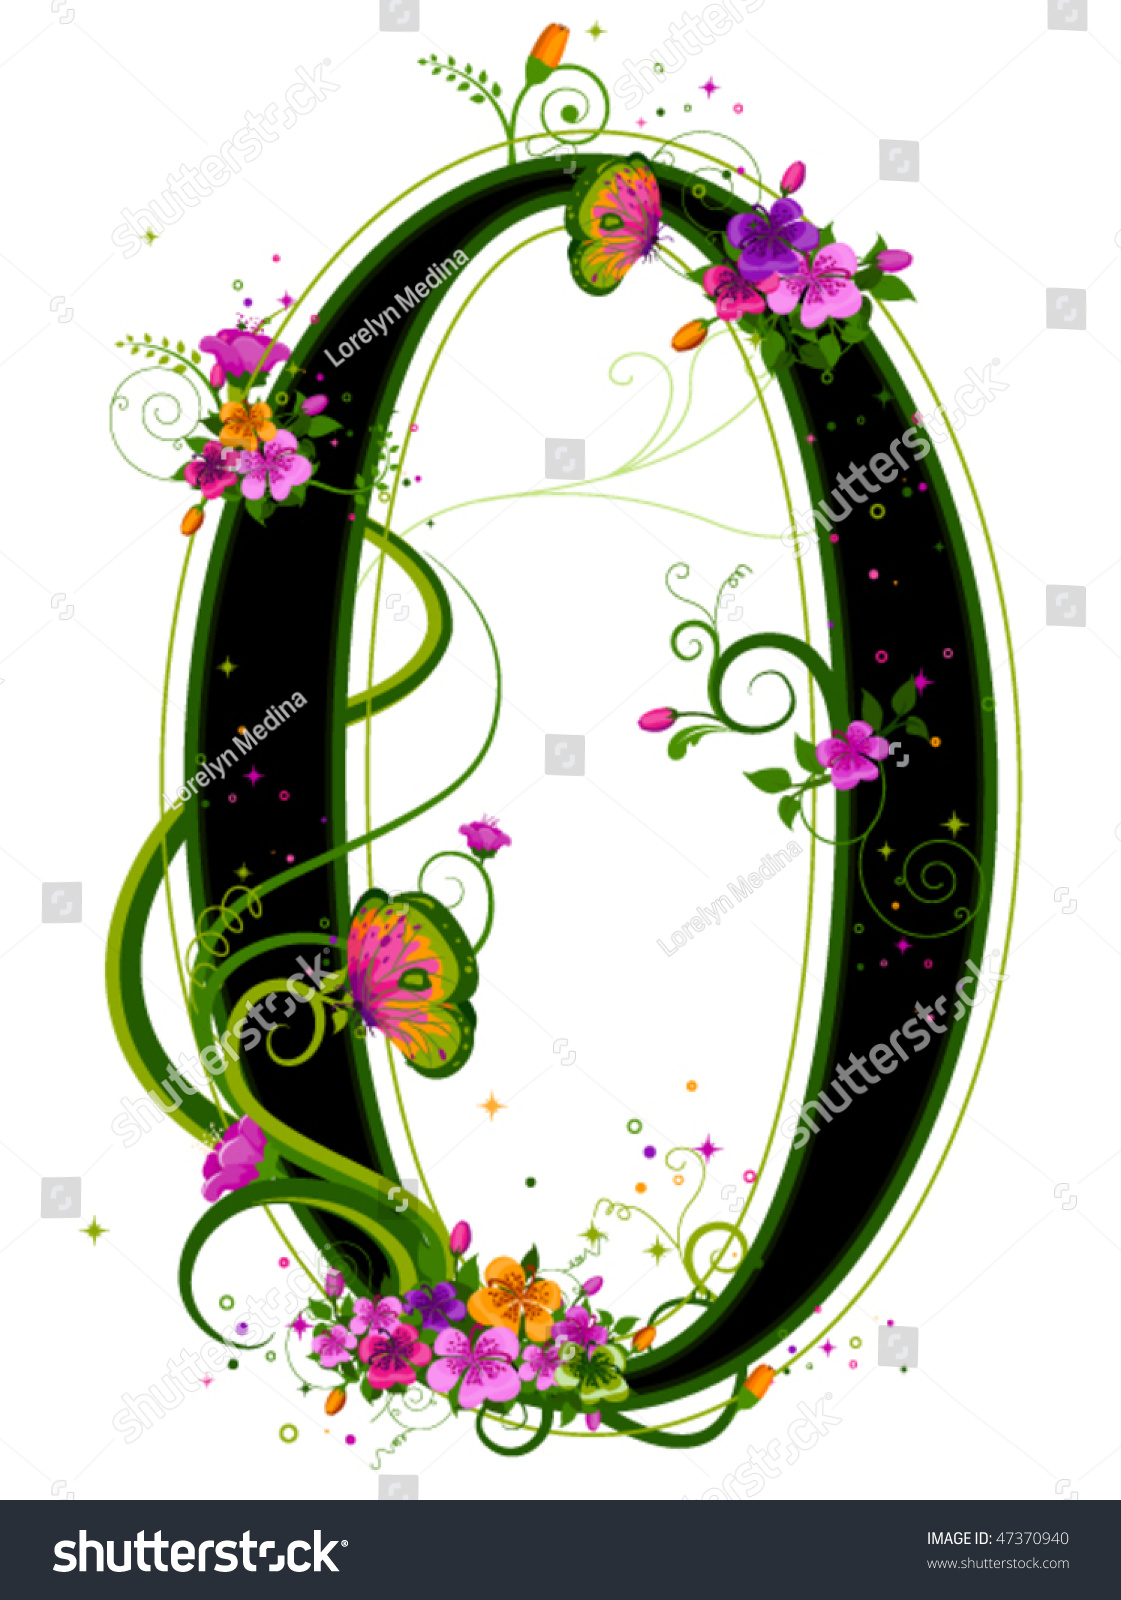 Floral Numbers - Vector - 47370940 : Shutterstock